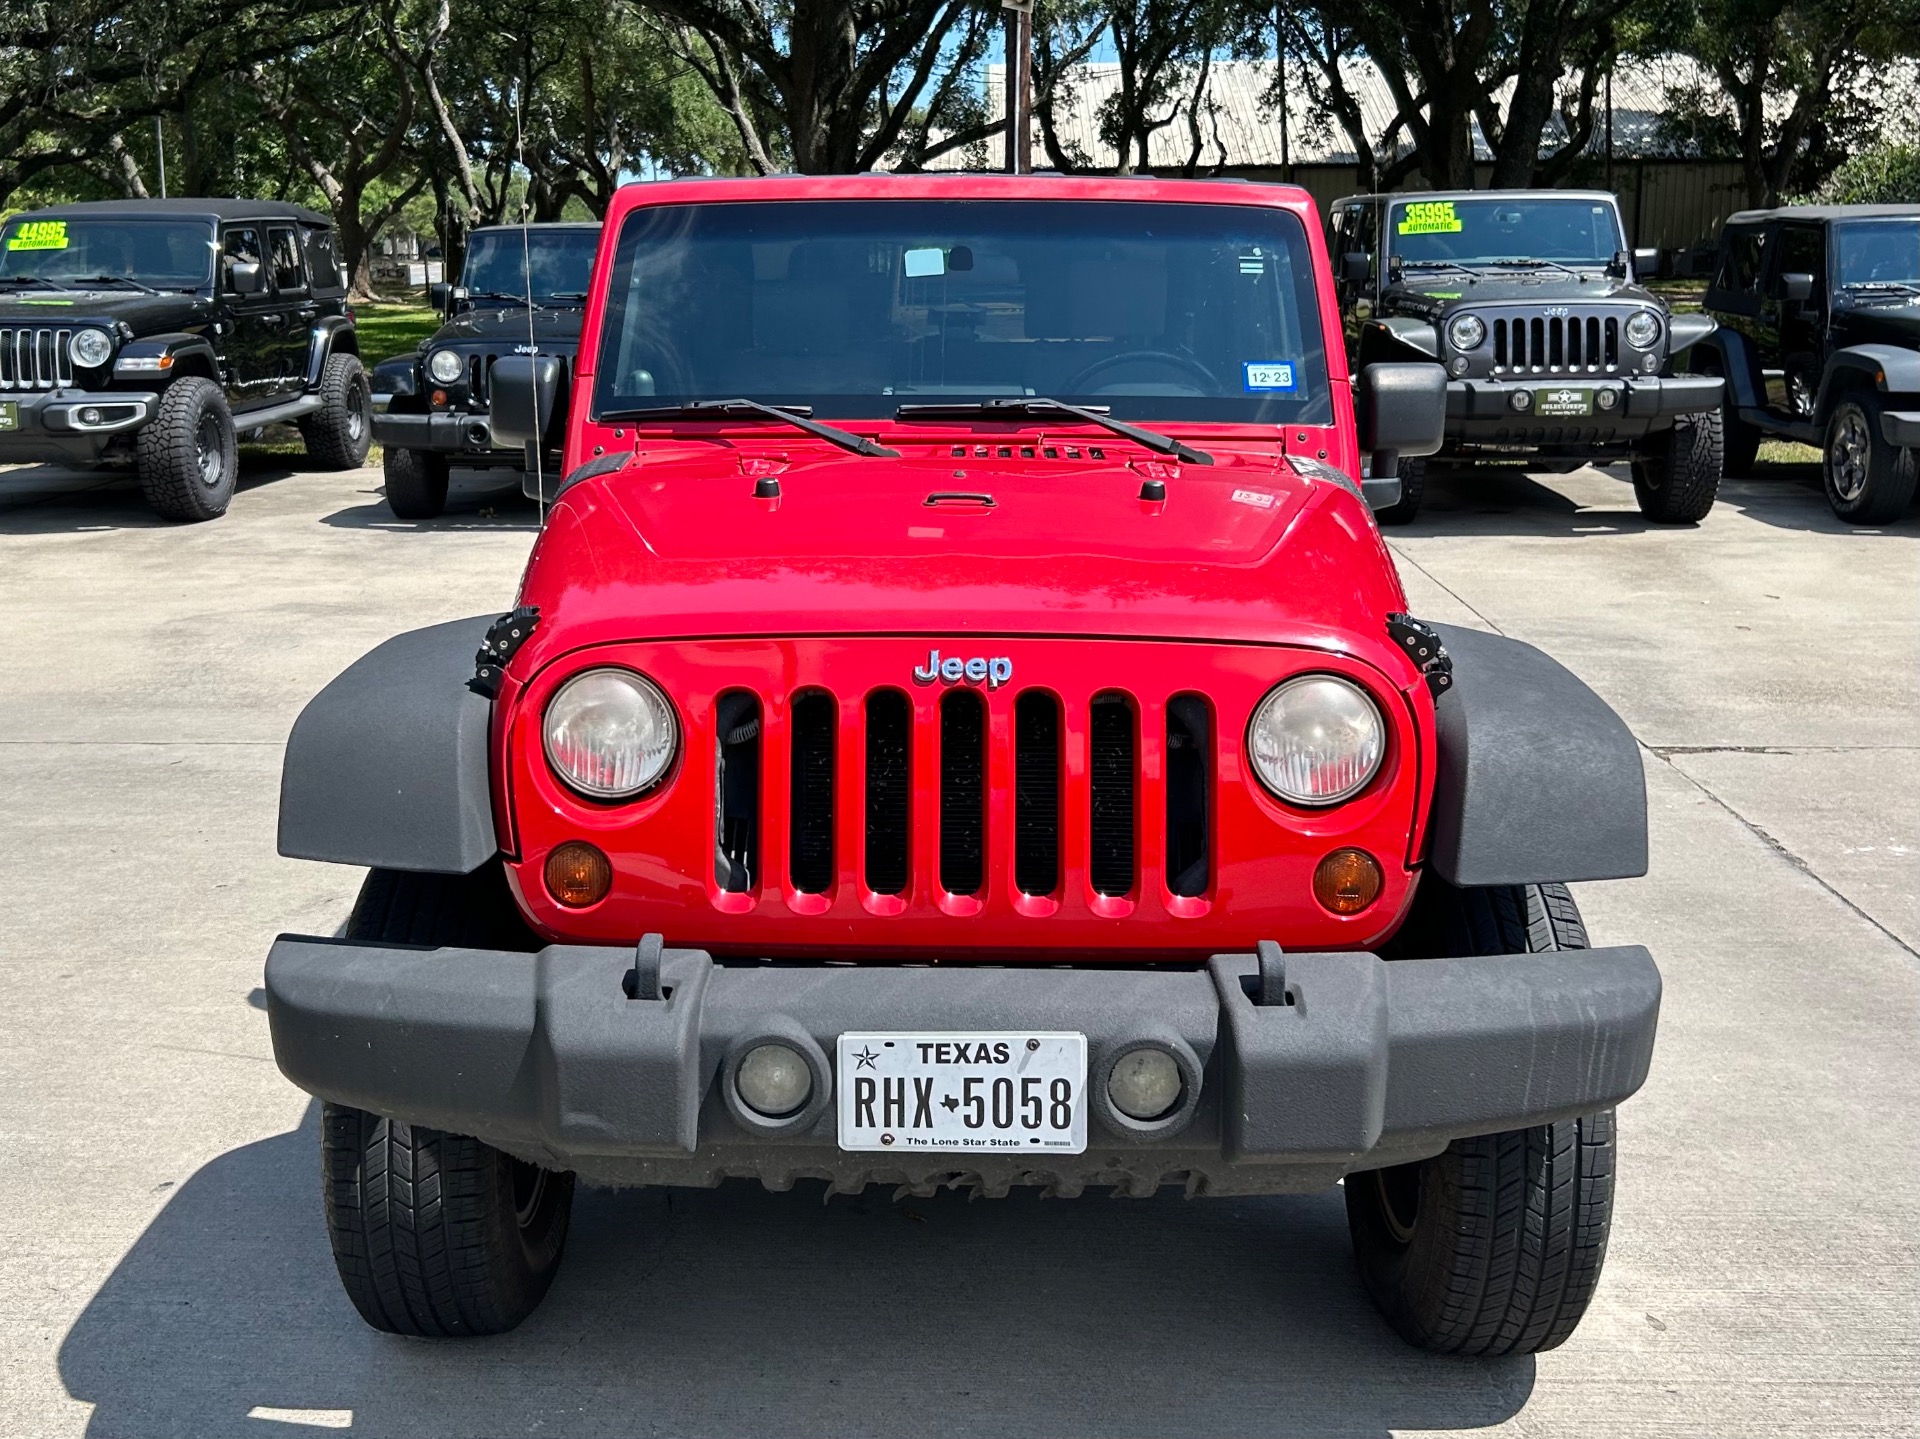 Used 2009 Jeep Wrangler Rubicon For Sale ($15,995) | Select Jeeps Inc ...